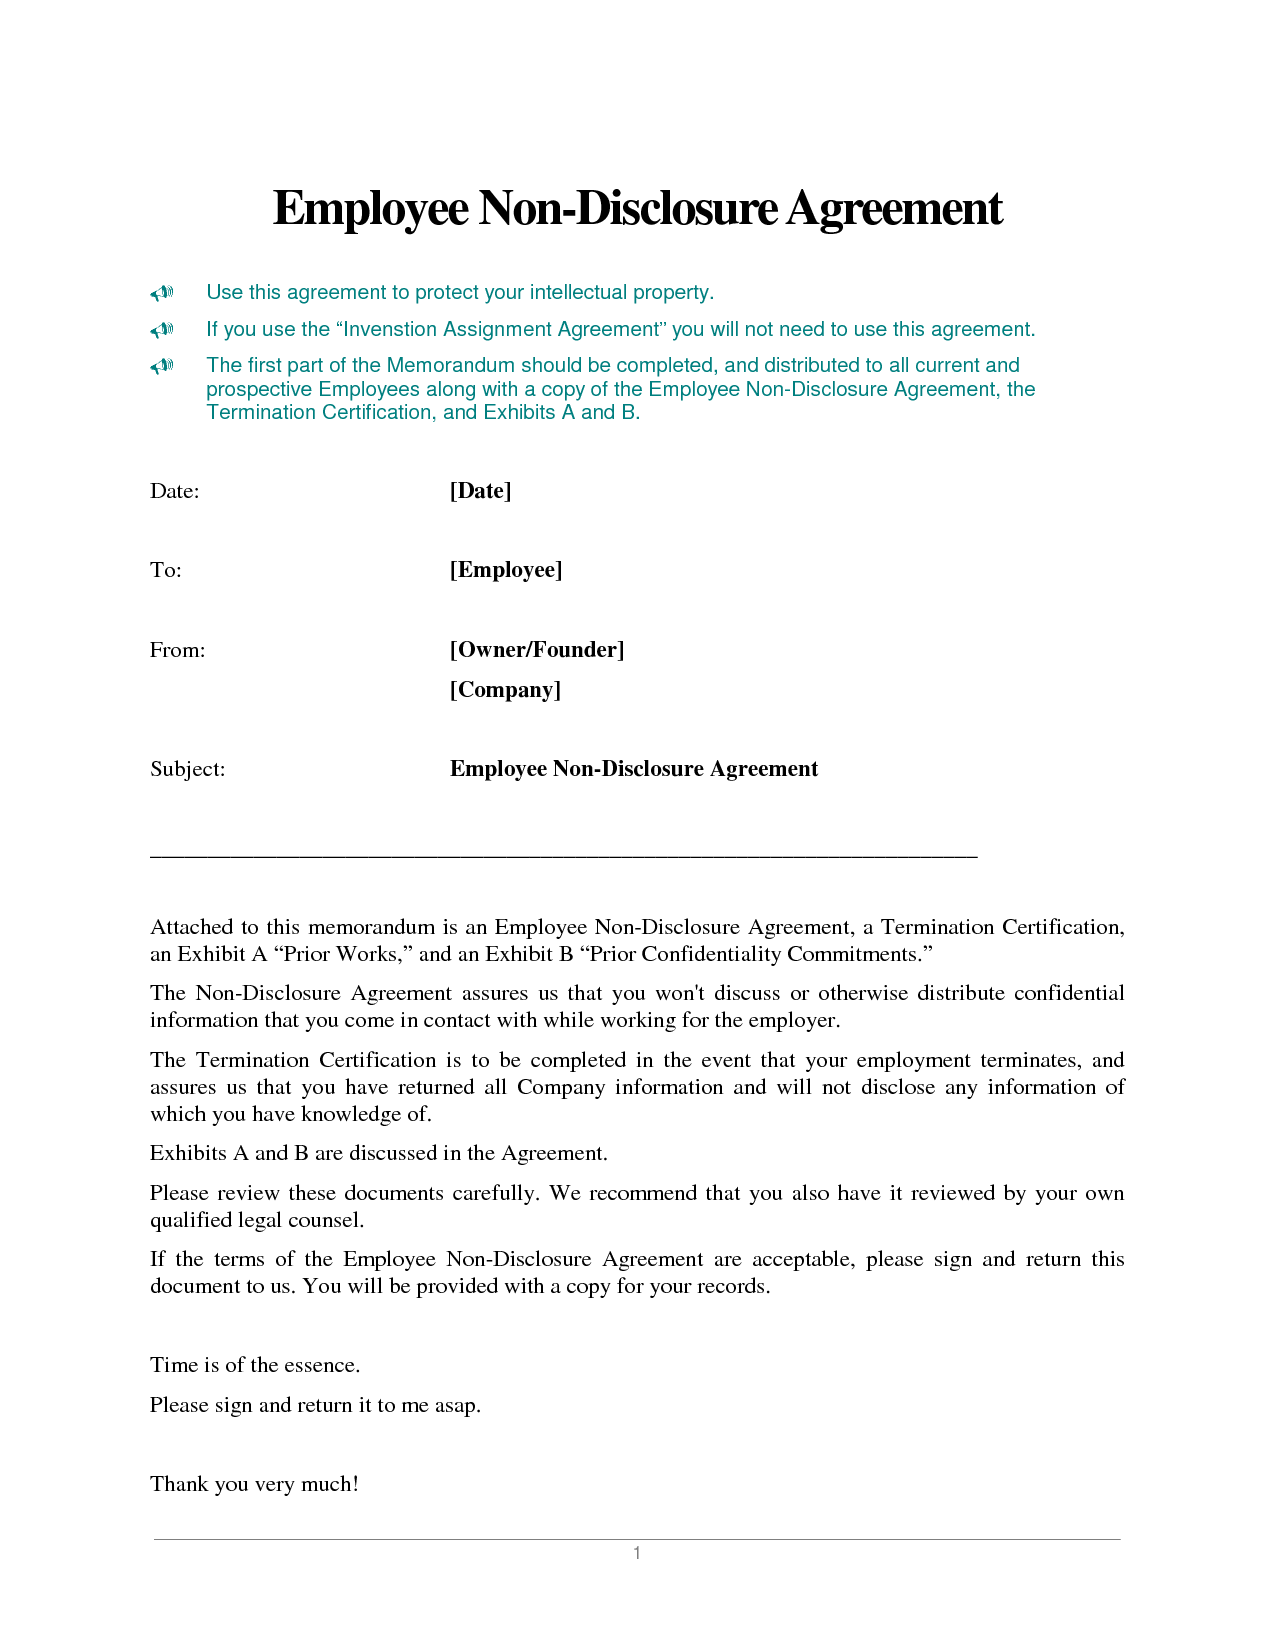 employee-non-disclosure-agreement-format-word-pdf